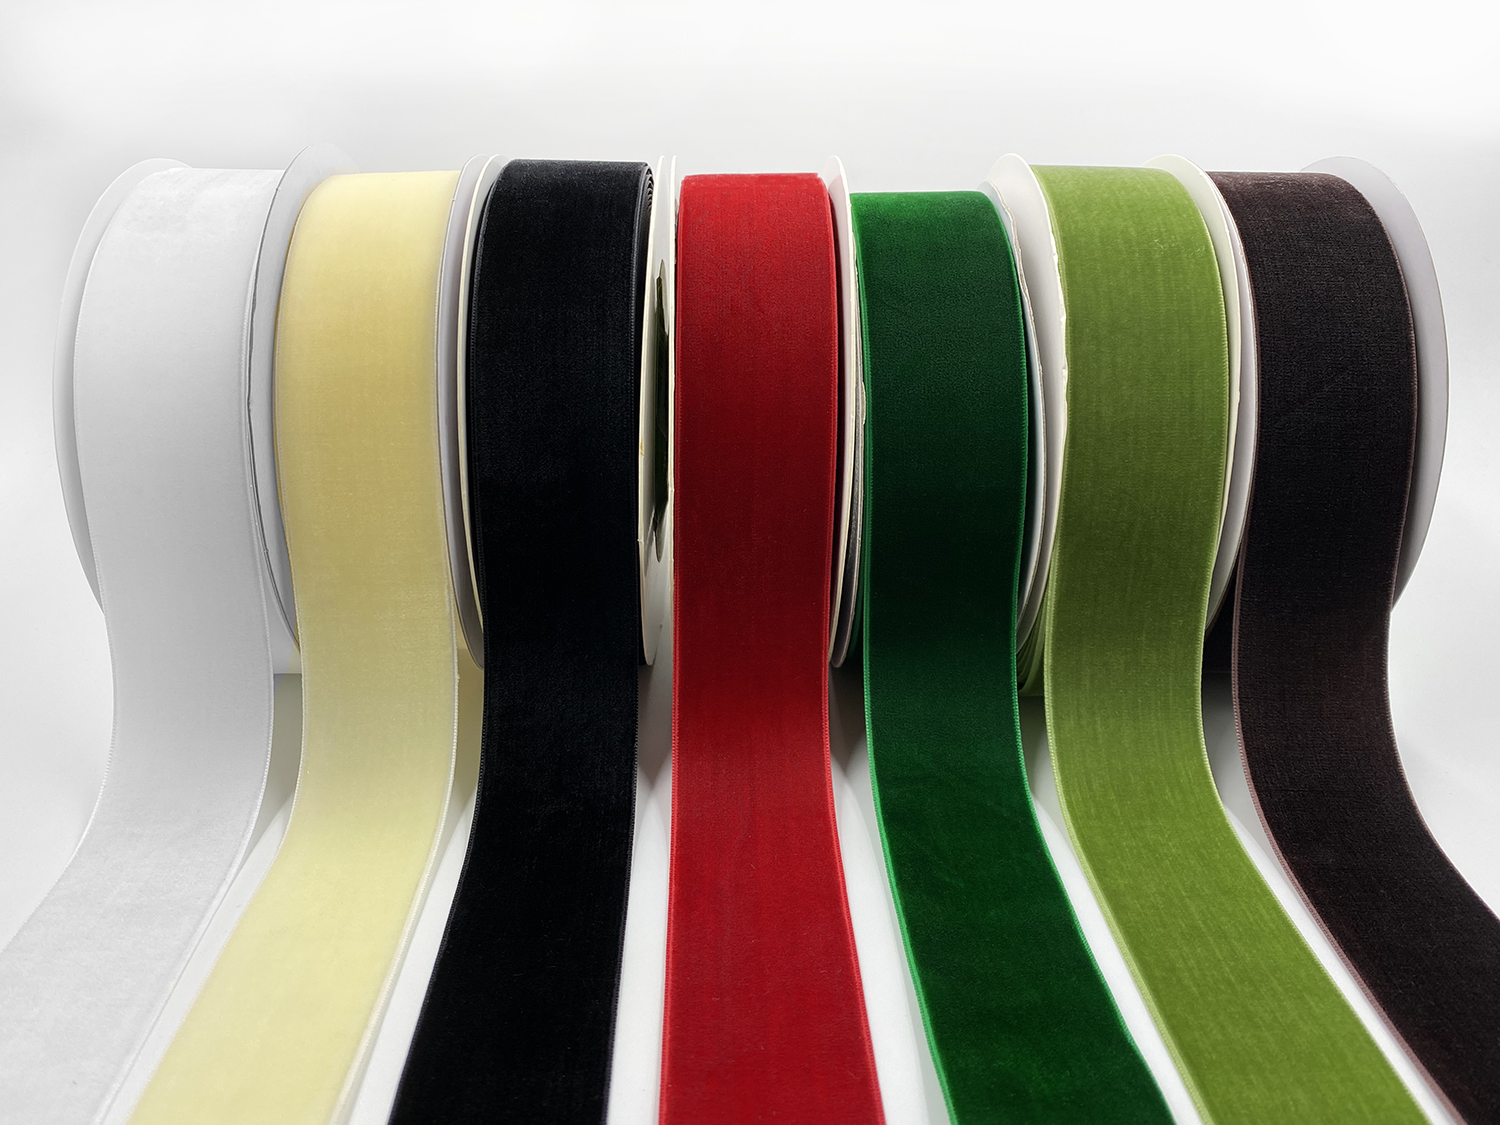 High Quality Velvet Ribbon 1.5 Inch ,38mm Width, 20yds/roll, No Elastic  Single Face Nylon Velour Webbing, Many Color Choices - Ribbons - AliExpress